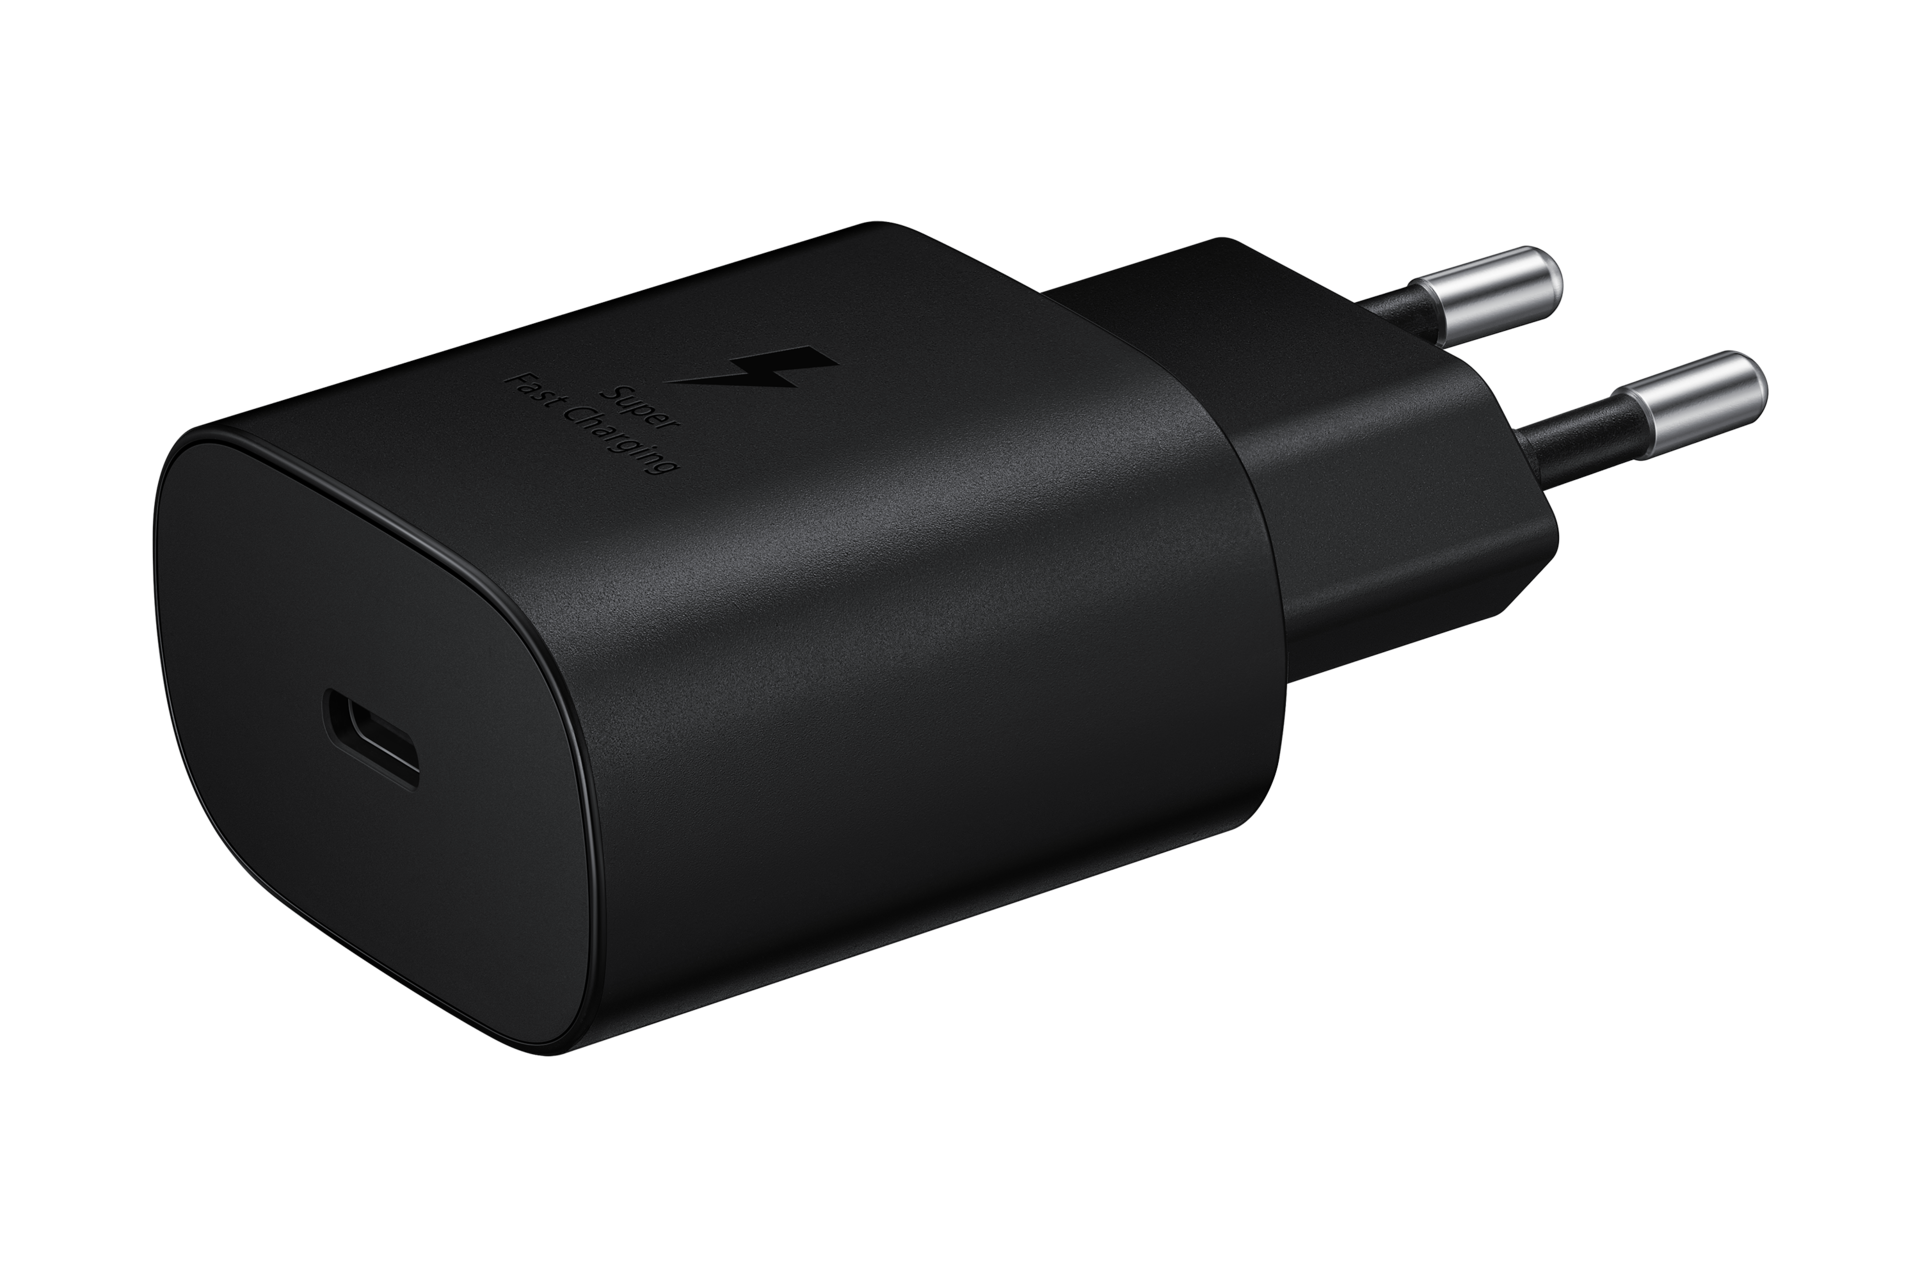 https://images.samsung.com/is/image/samsung/p6pim/fr/ep-ta800nbegeu/gallery/fr-wall-charger-for-super-fast-charging-25w-371855-ep-ta800nbegeu-370561974?$720_576_JPG$